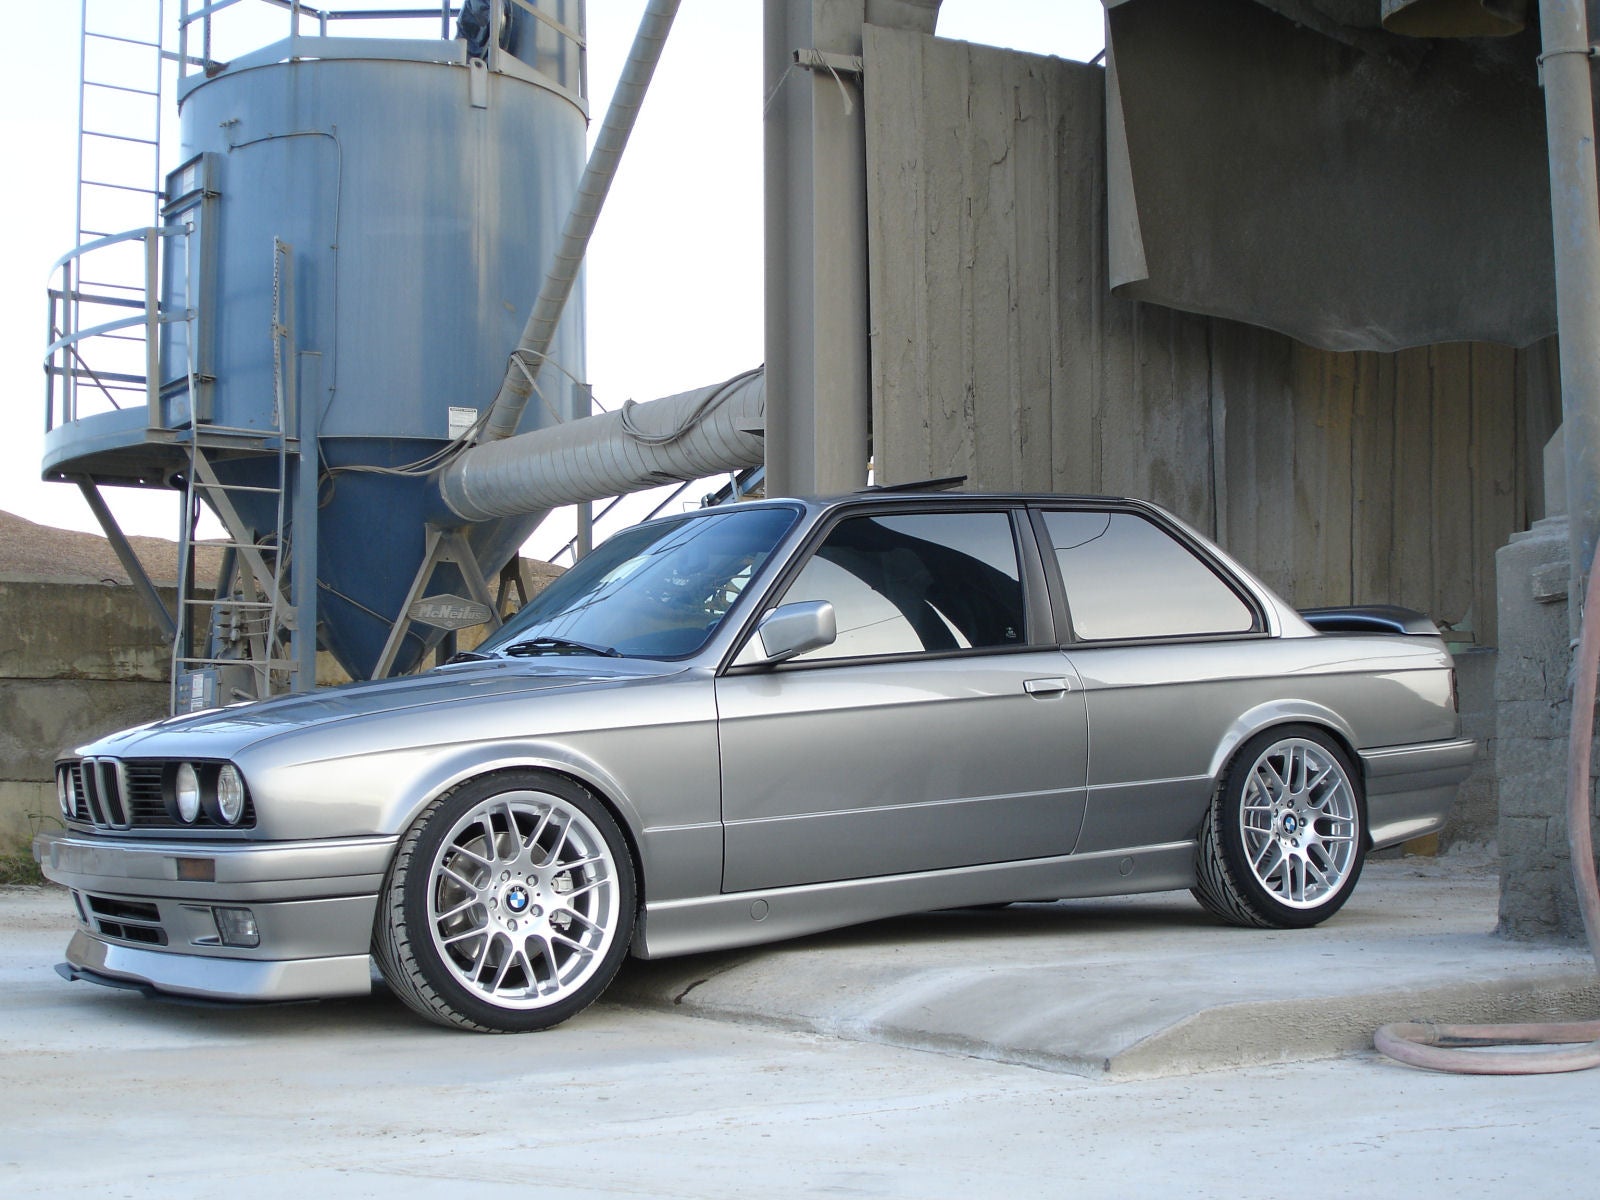  Series on 1991 Bmw 3 Series   Pictures   1991 Bmw 325 325is Picture   Cargurus